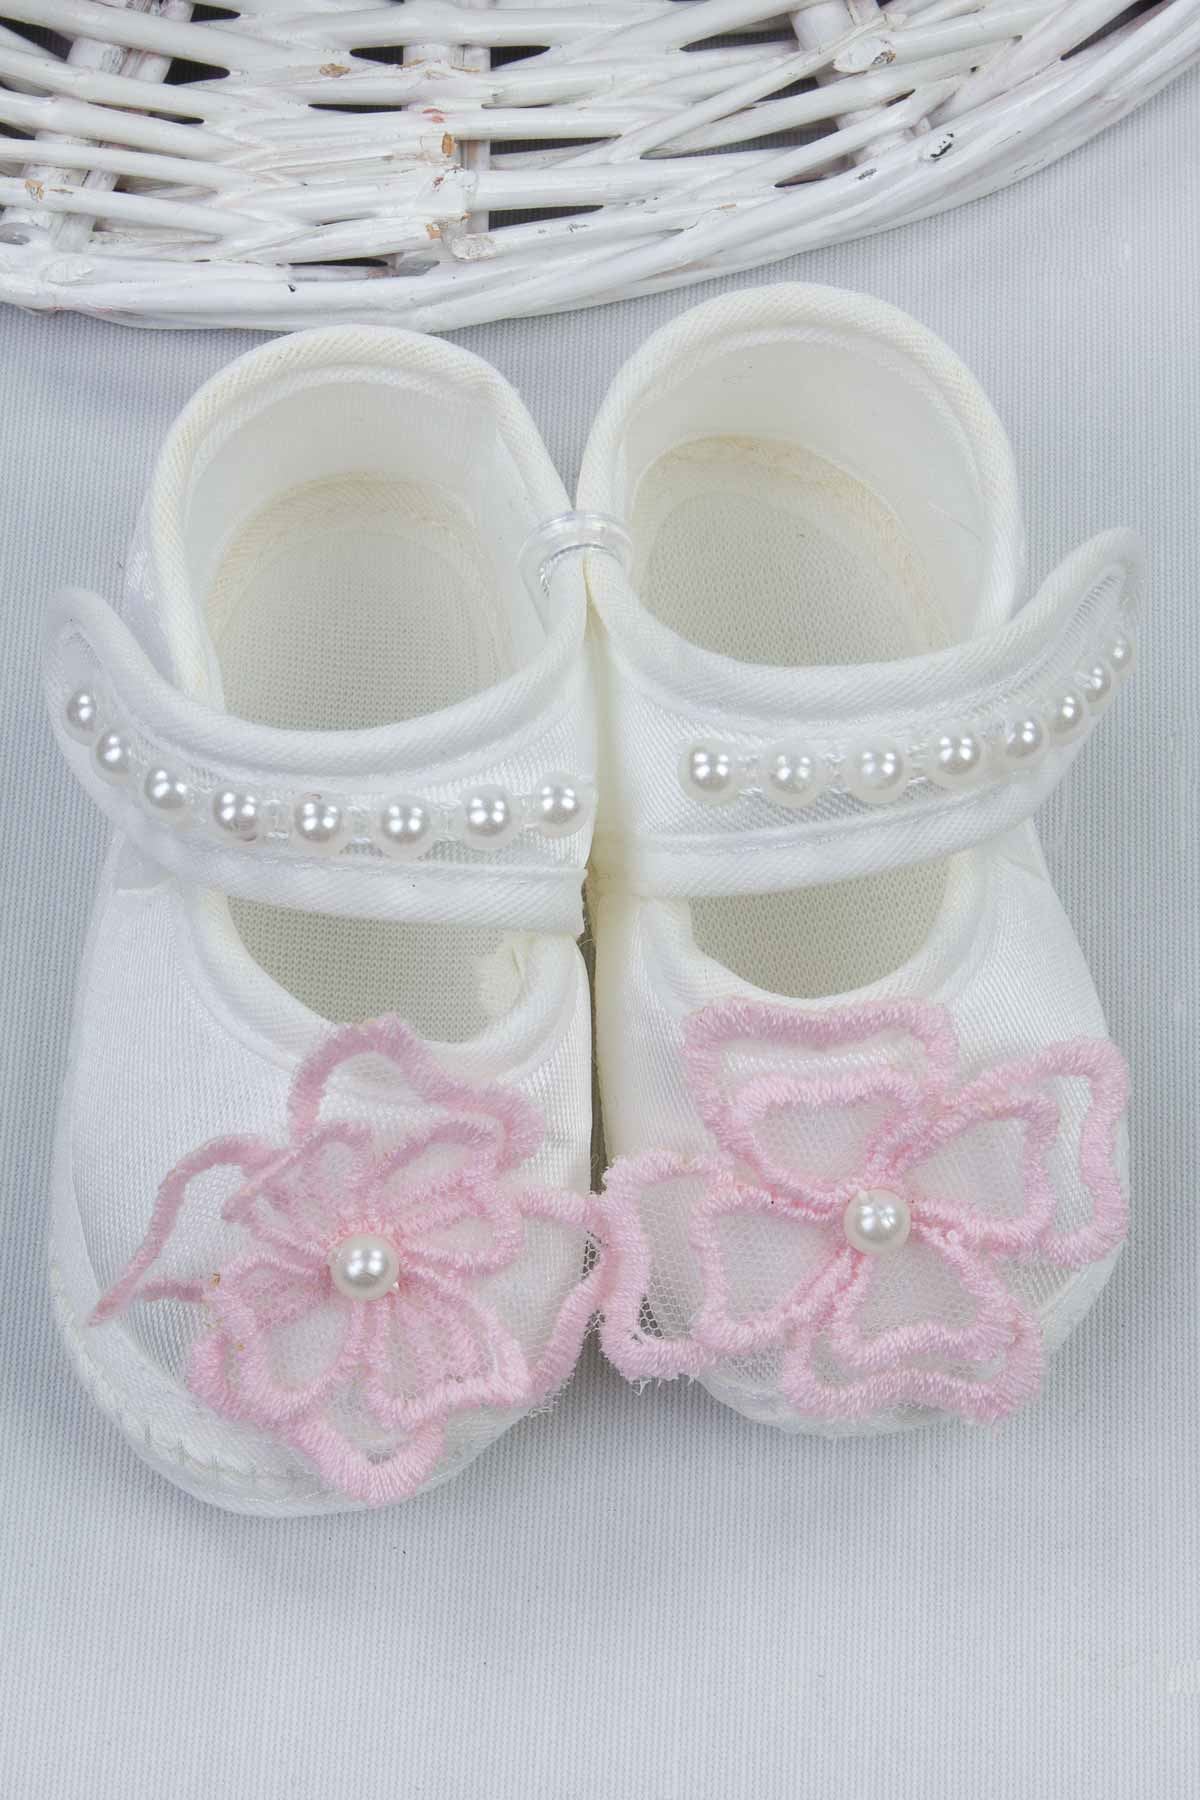 Pink White Baby Girl Newborn Gift Suit Set Girls Babies Tights Stockings Hair Bandana Shoes Fashion Style 2021 Mom Gift package